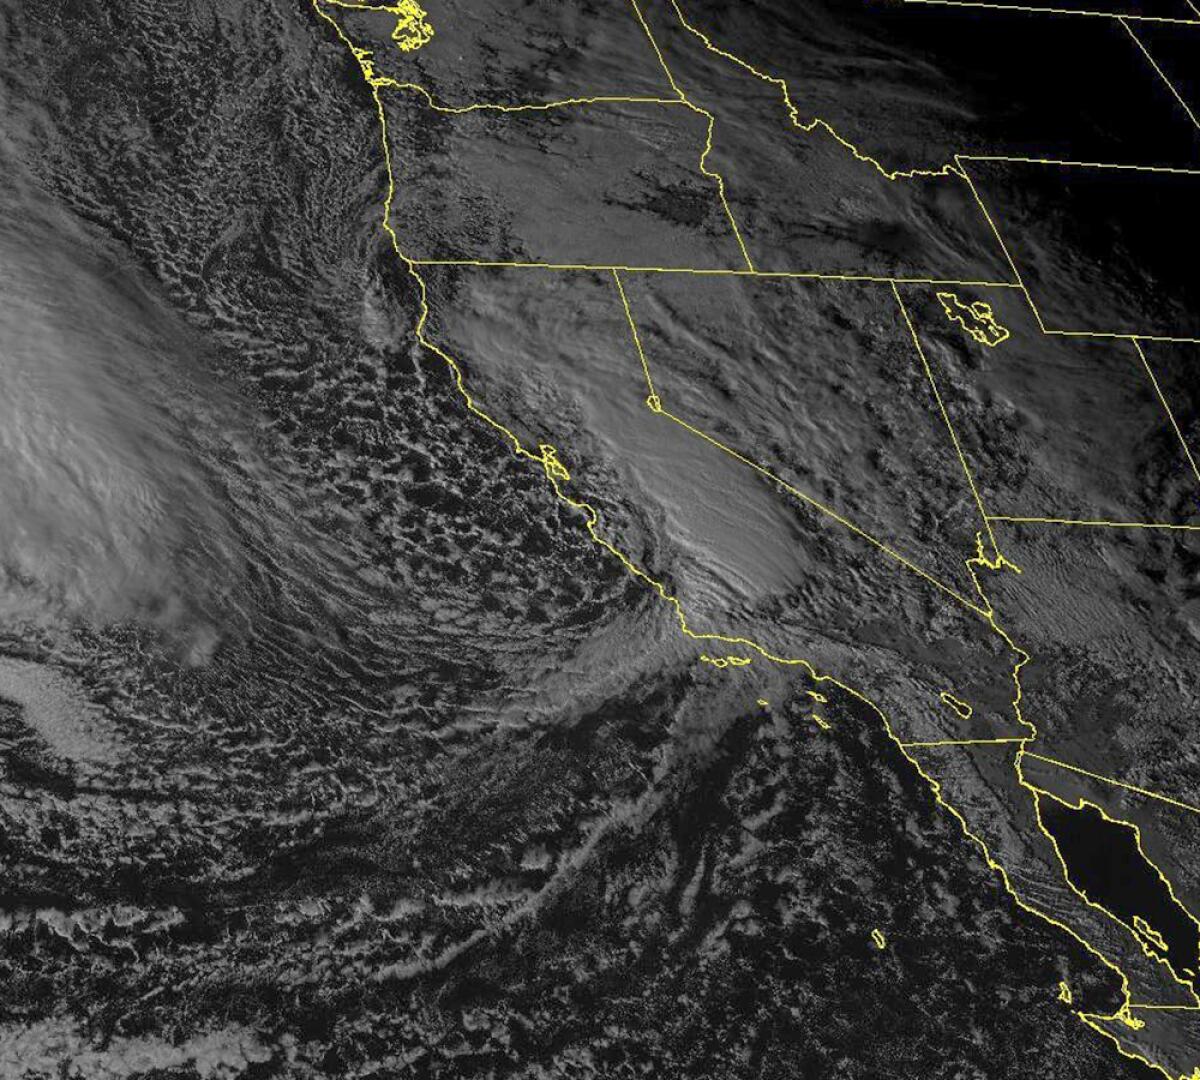 A satellite view shows clouds over the West Coast.